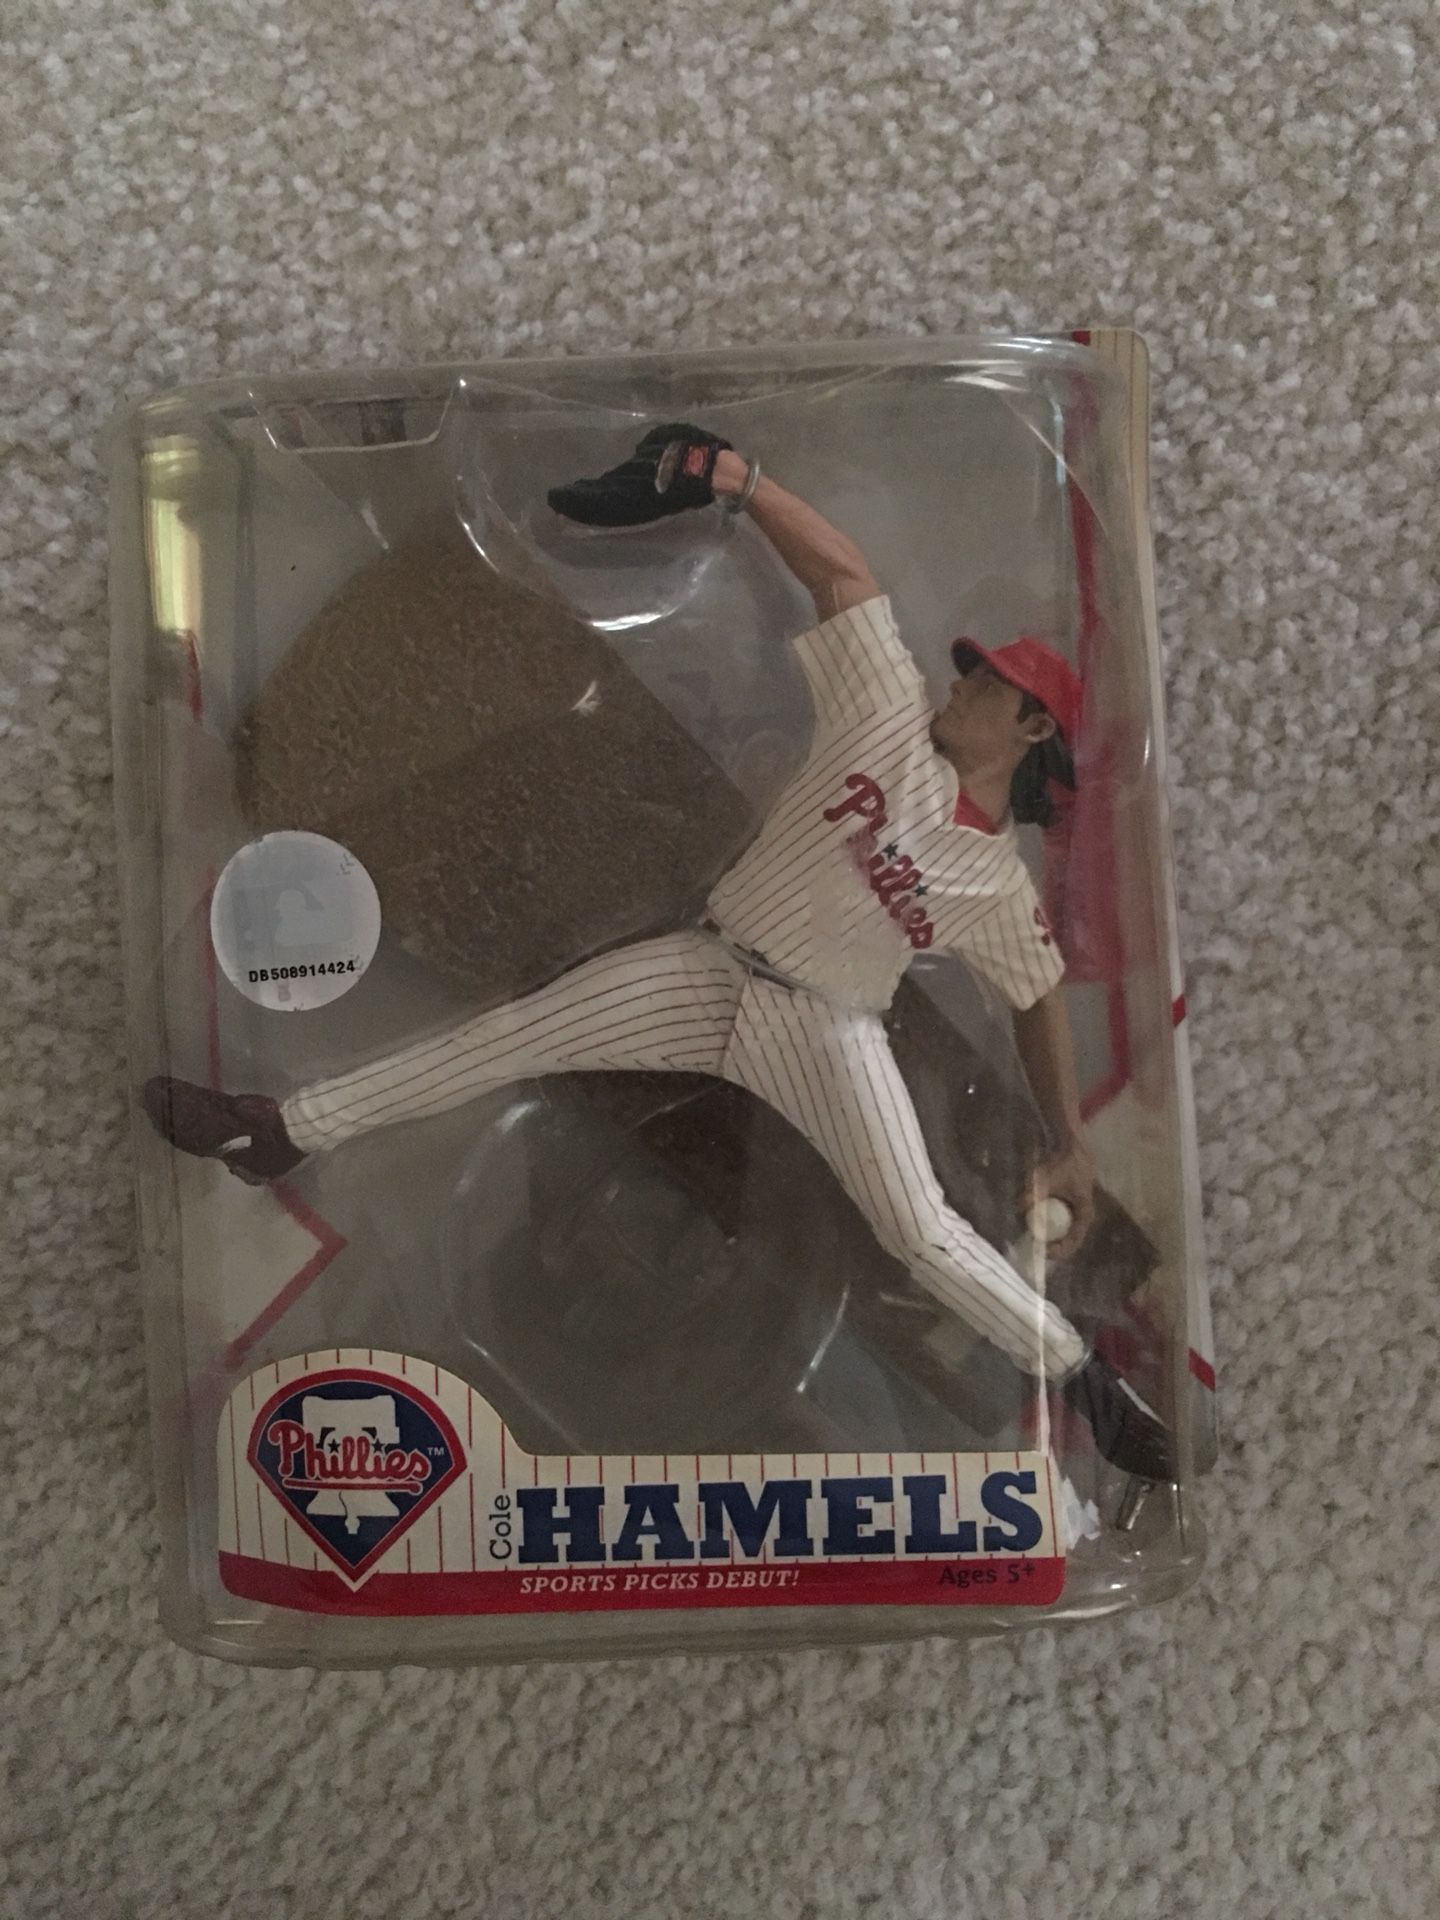 Cole Hamels Action Figure Home Pinstripe Jersey Sports Picks Exclusive asking $20